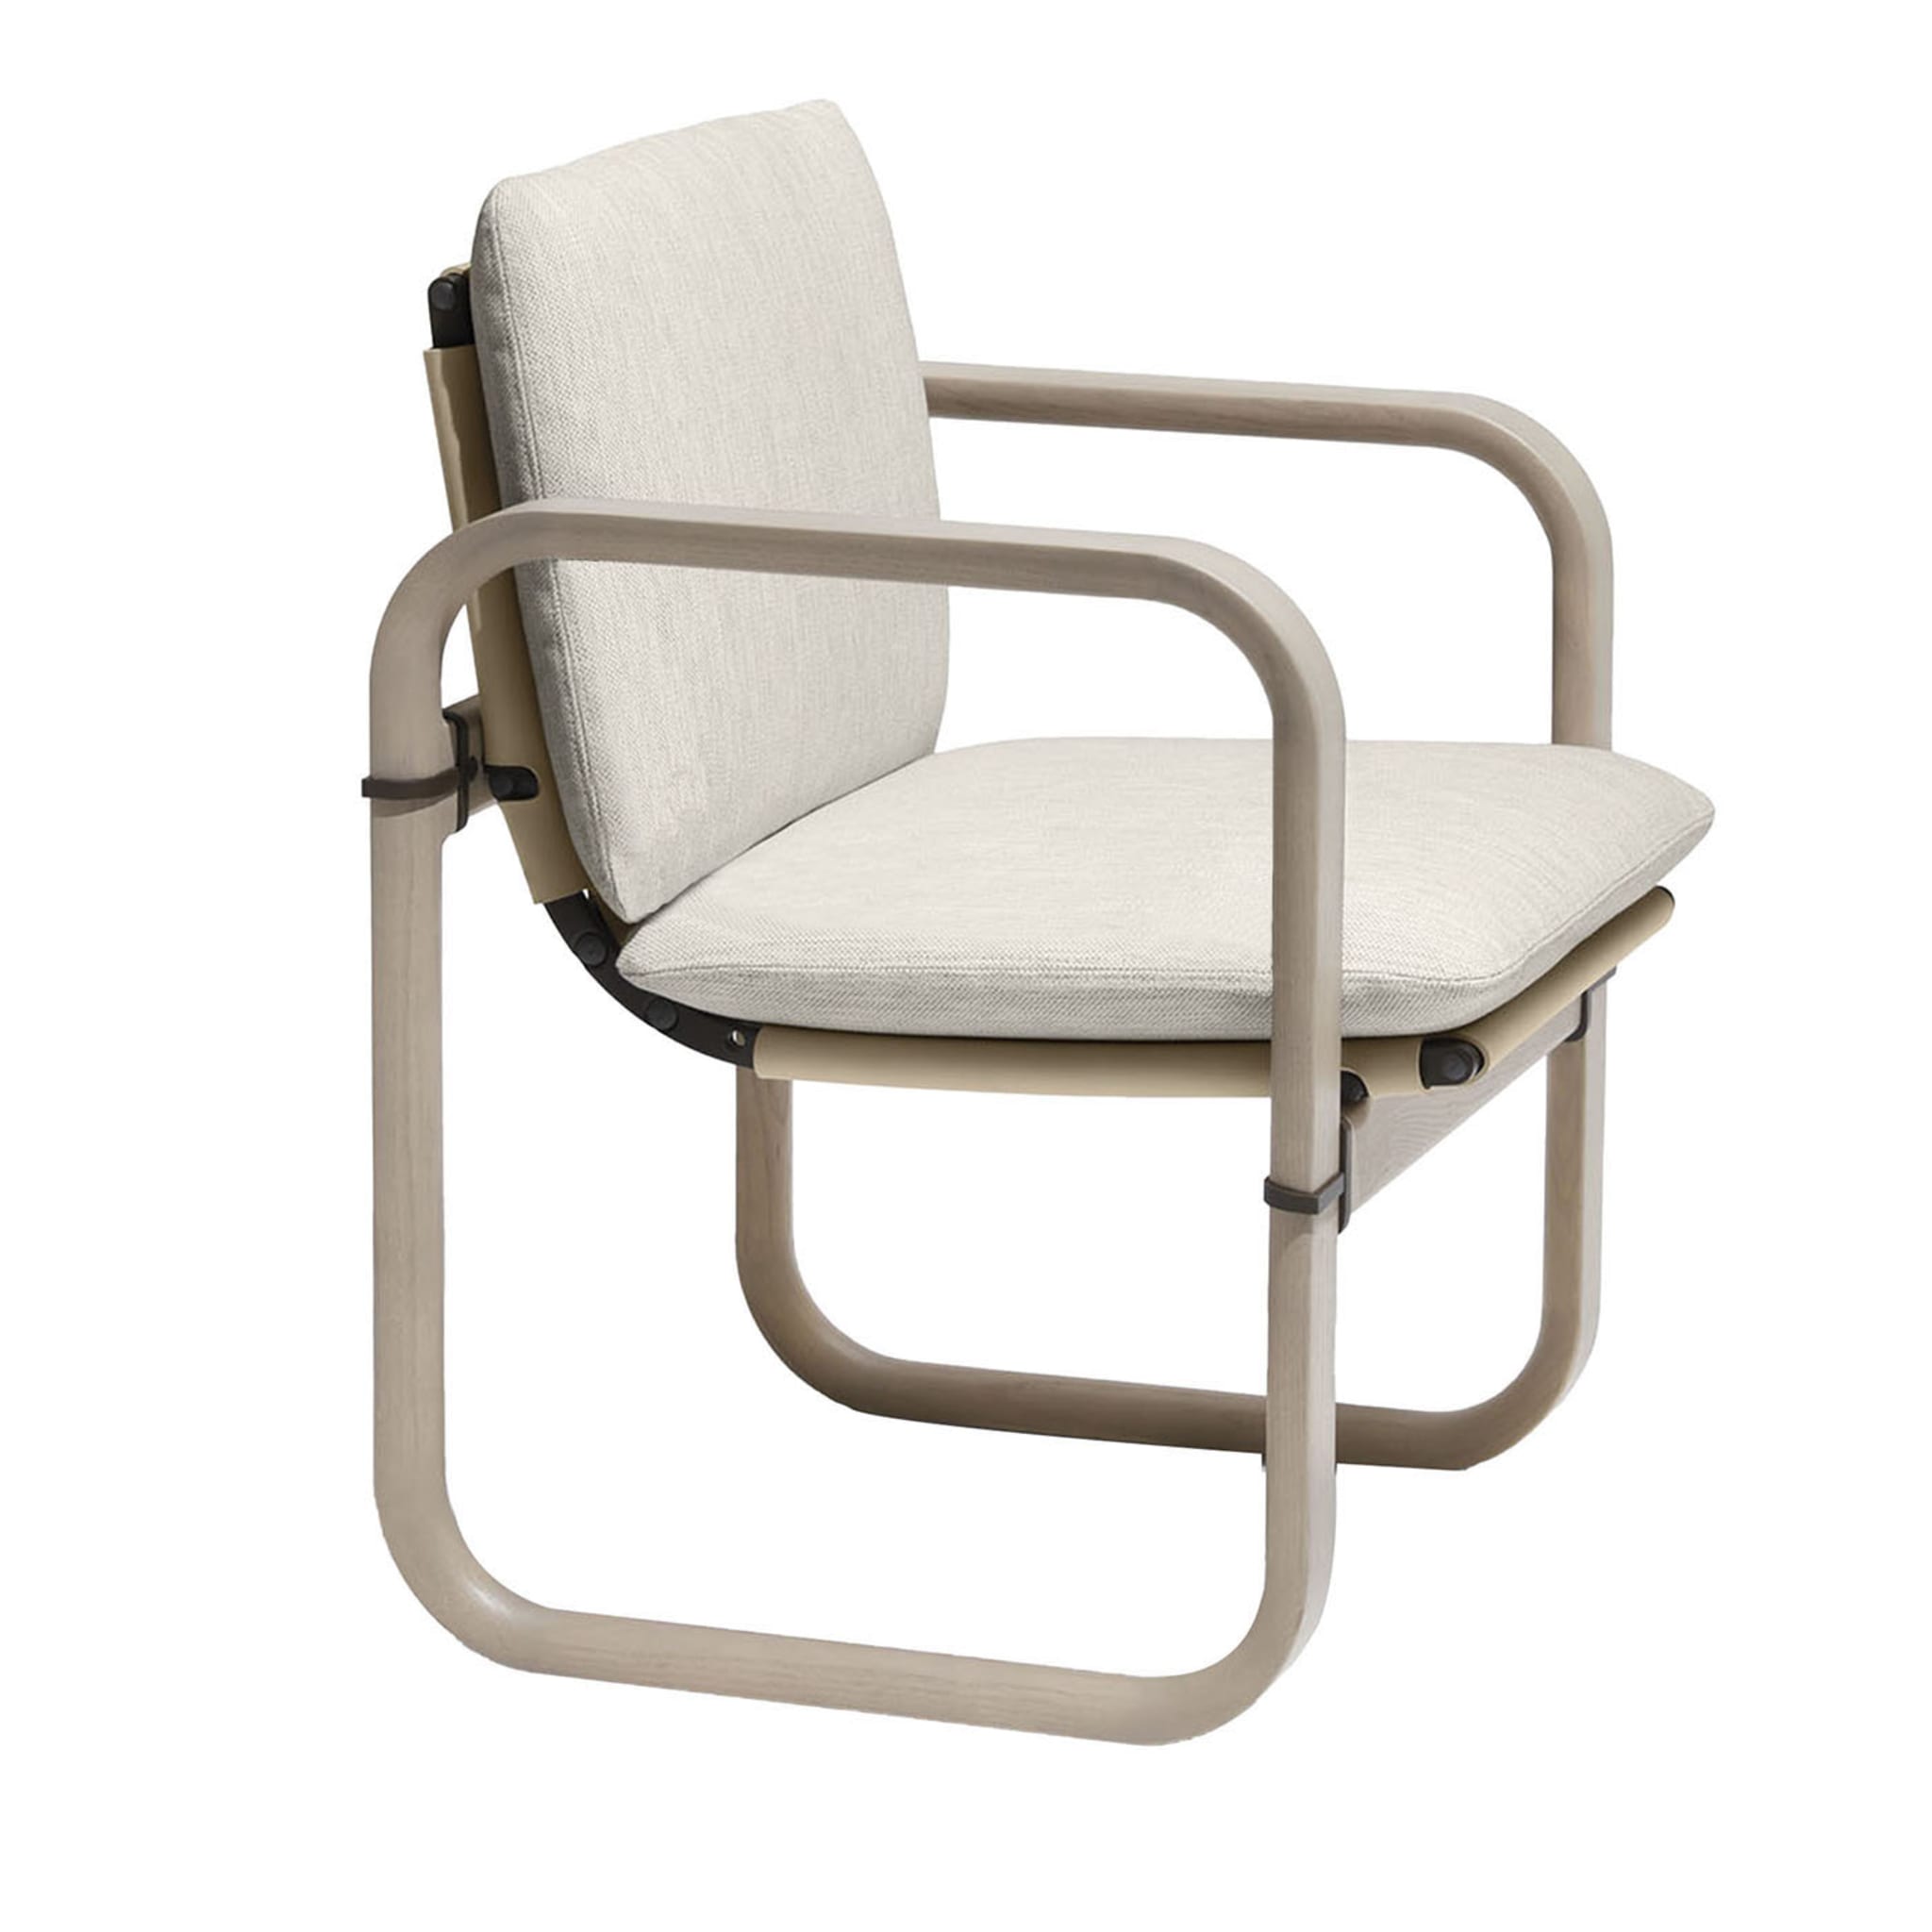 Loop Outdoor Chair by Ludovica+Roberto Palomba - Main view